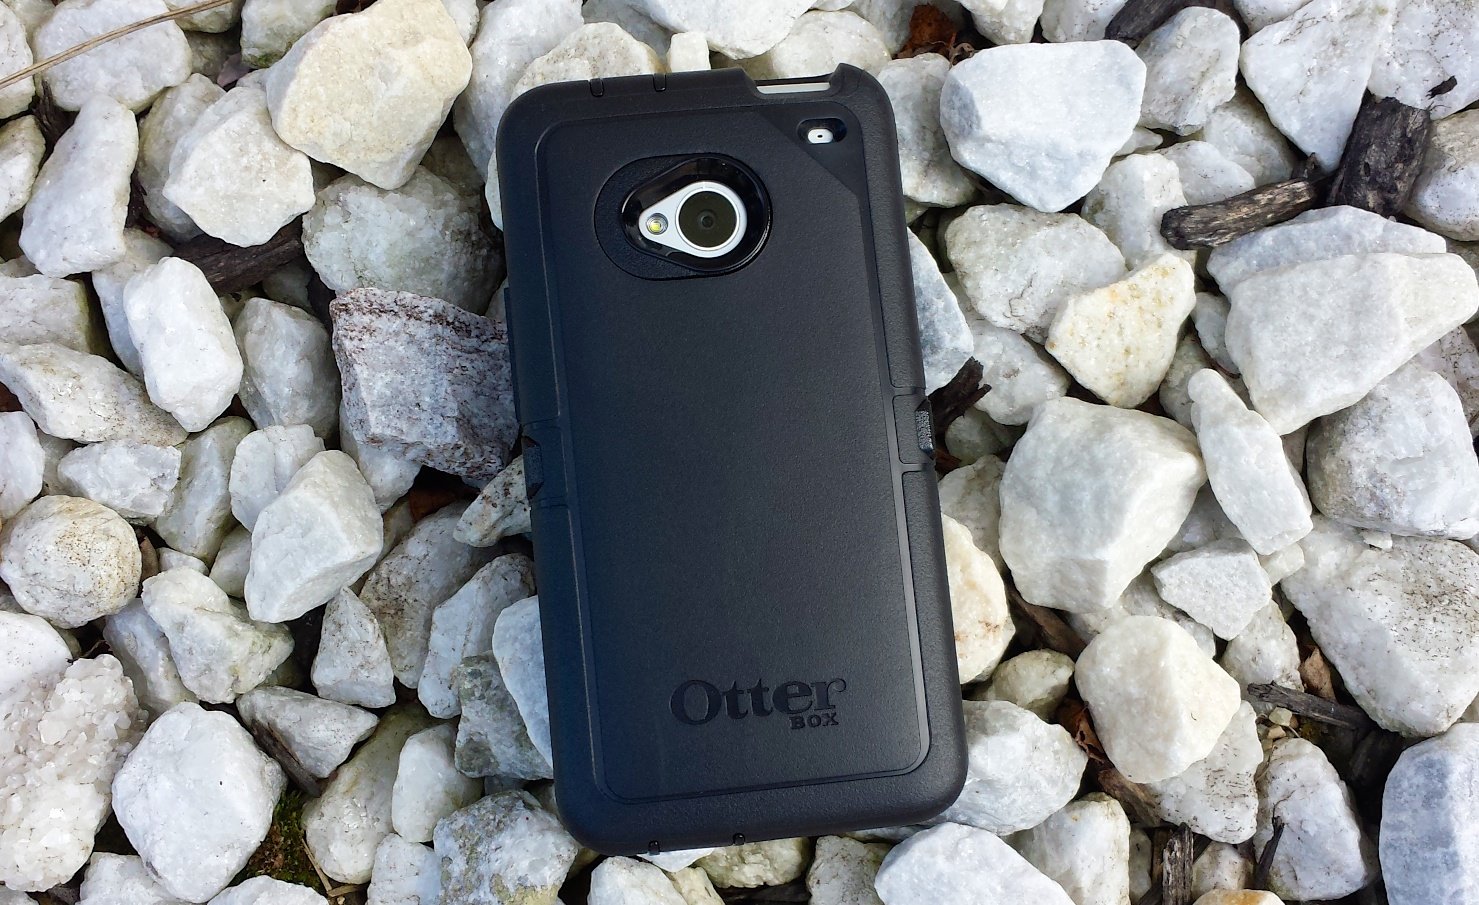 This OtterBox Defender Series HTC One case offers protection from drops.